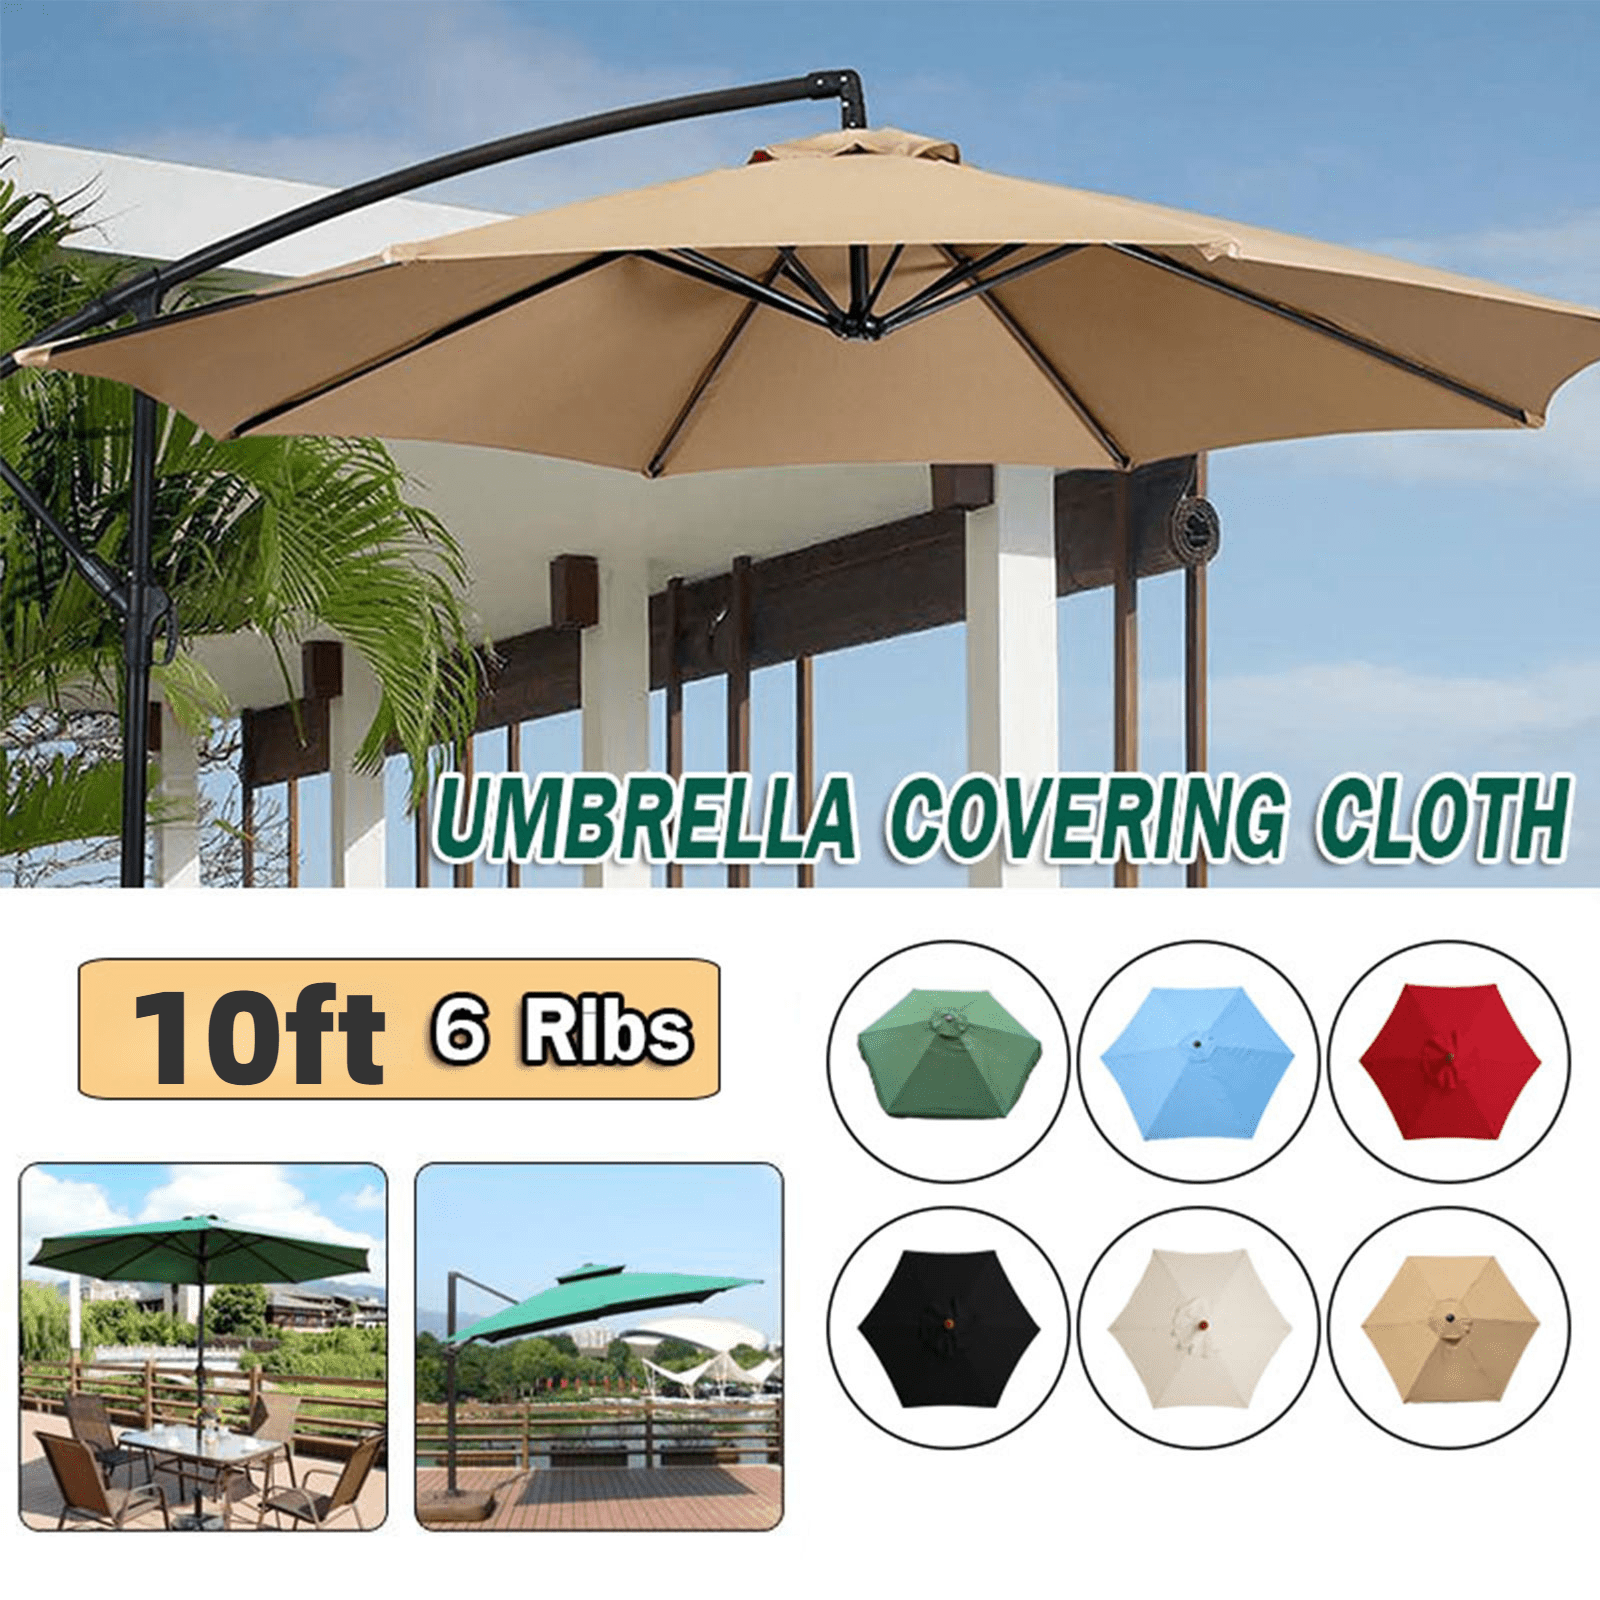 10ft 6 Ribs Patio Umbrella Canopy Top Cover Waterproof Replacement Fabric Cloth 